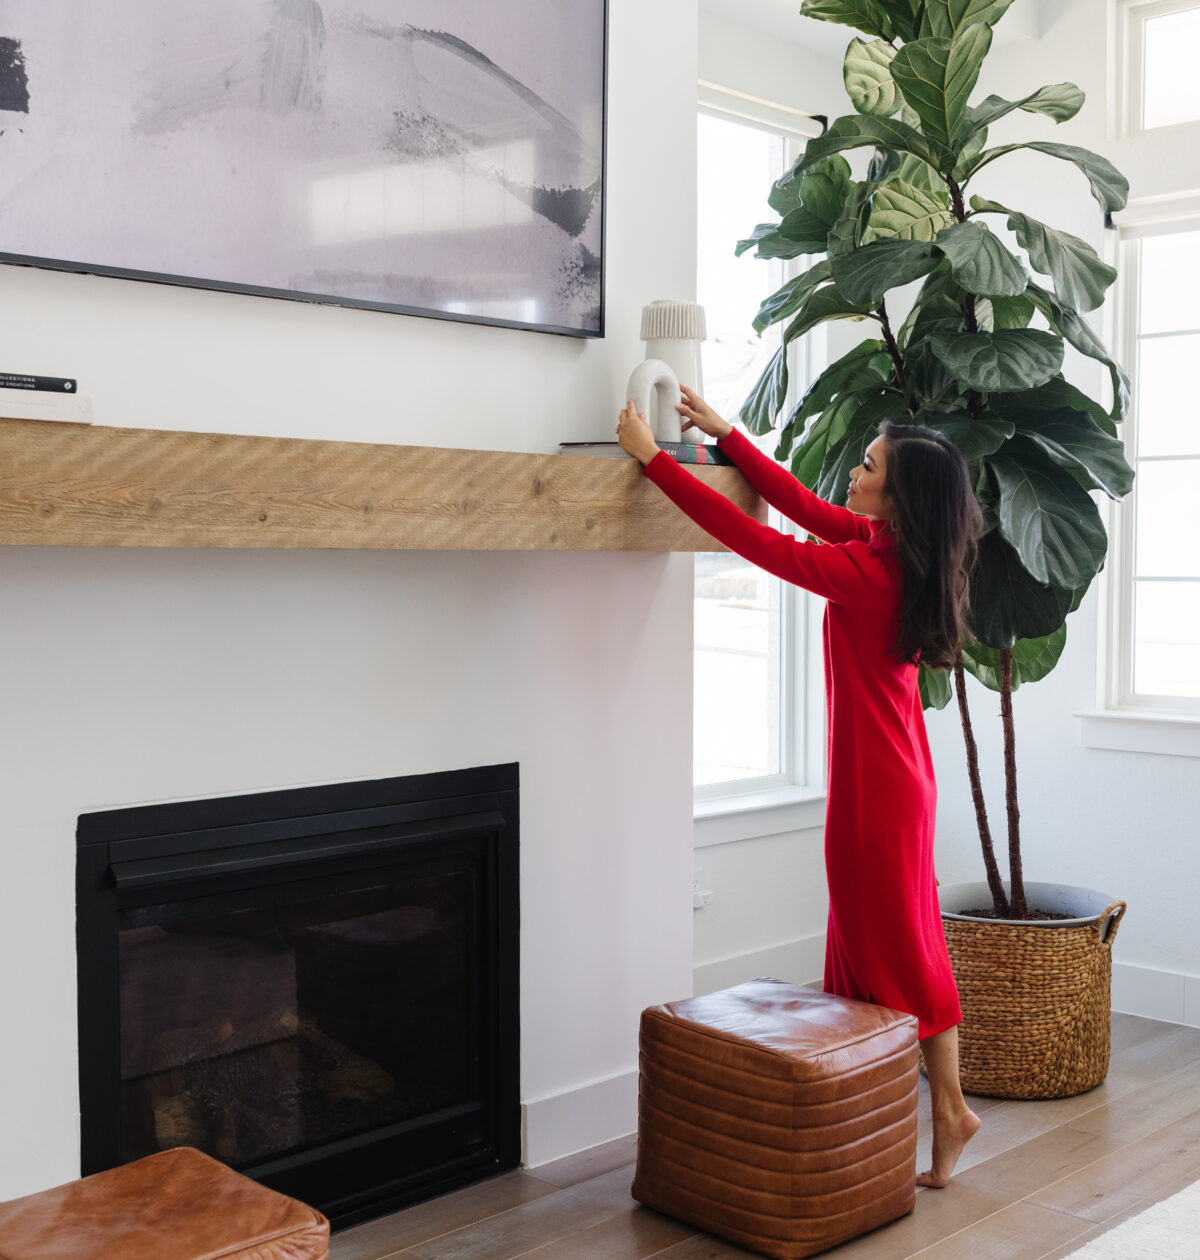 Blogger Hoang-Kim Cung's living room in her transitional style home with a fiddle leaf fig, Samsung Frame TV, and Arhaus leather poufs